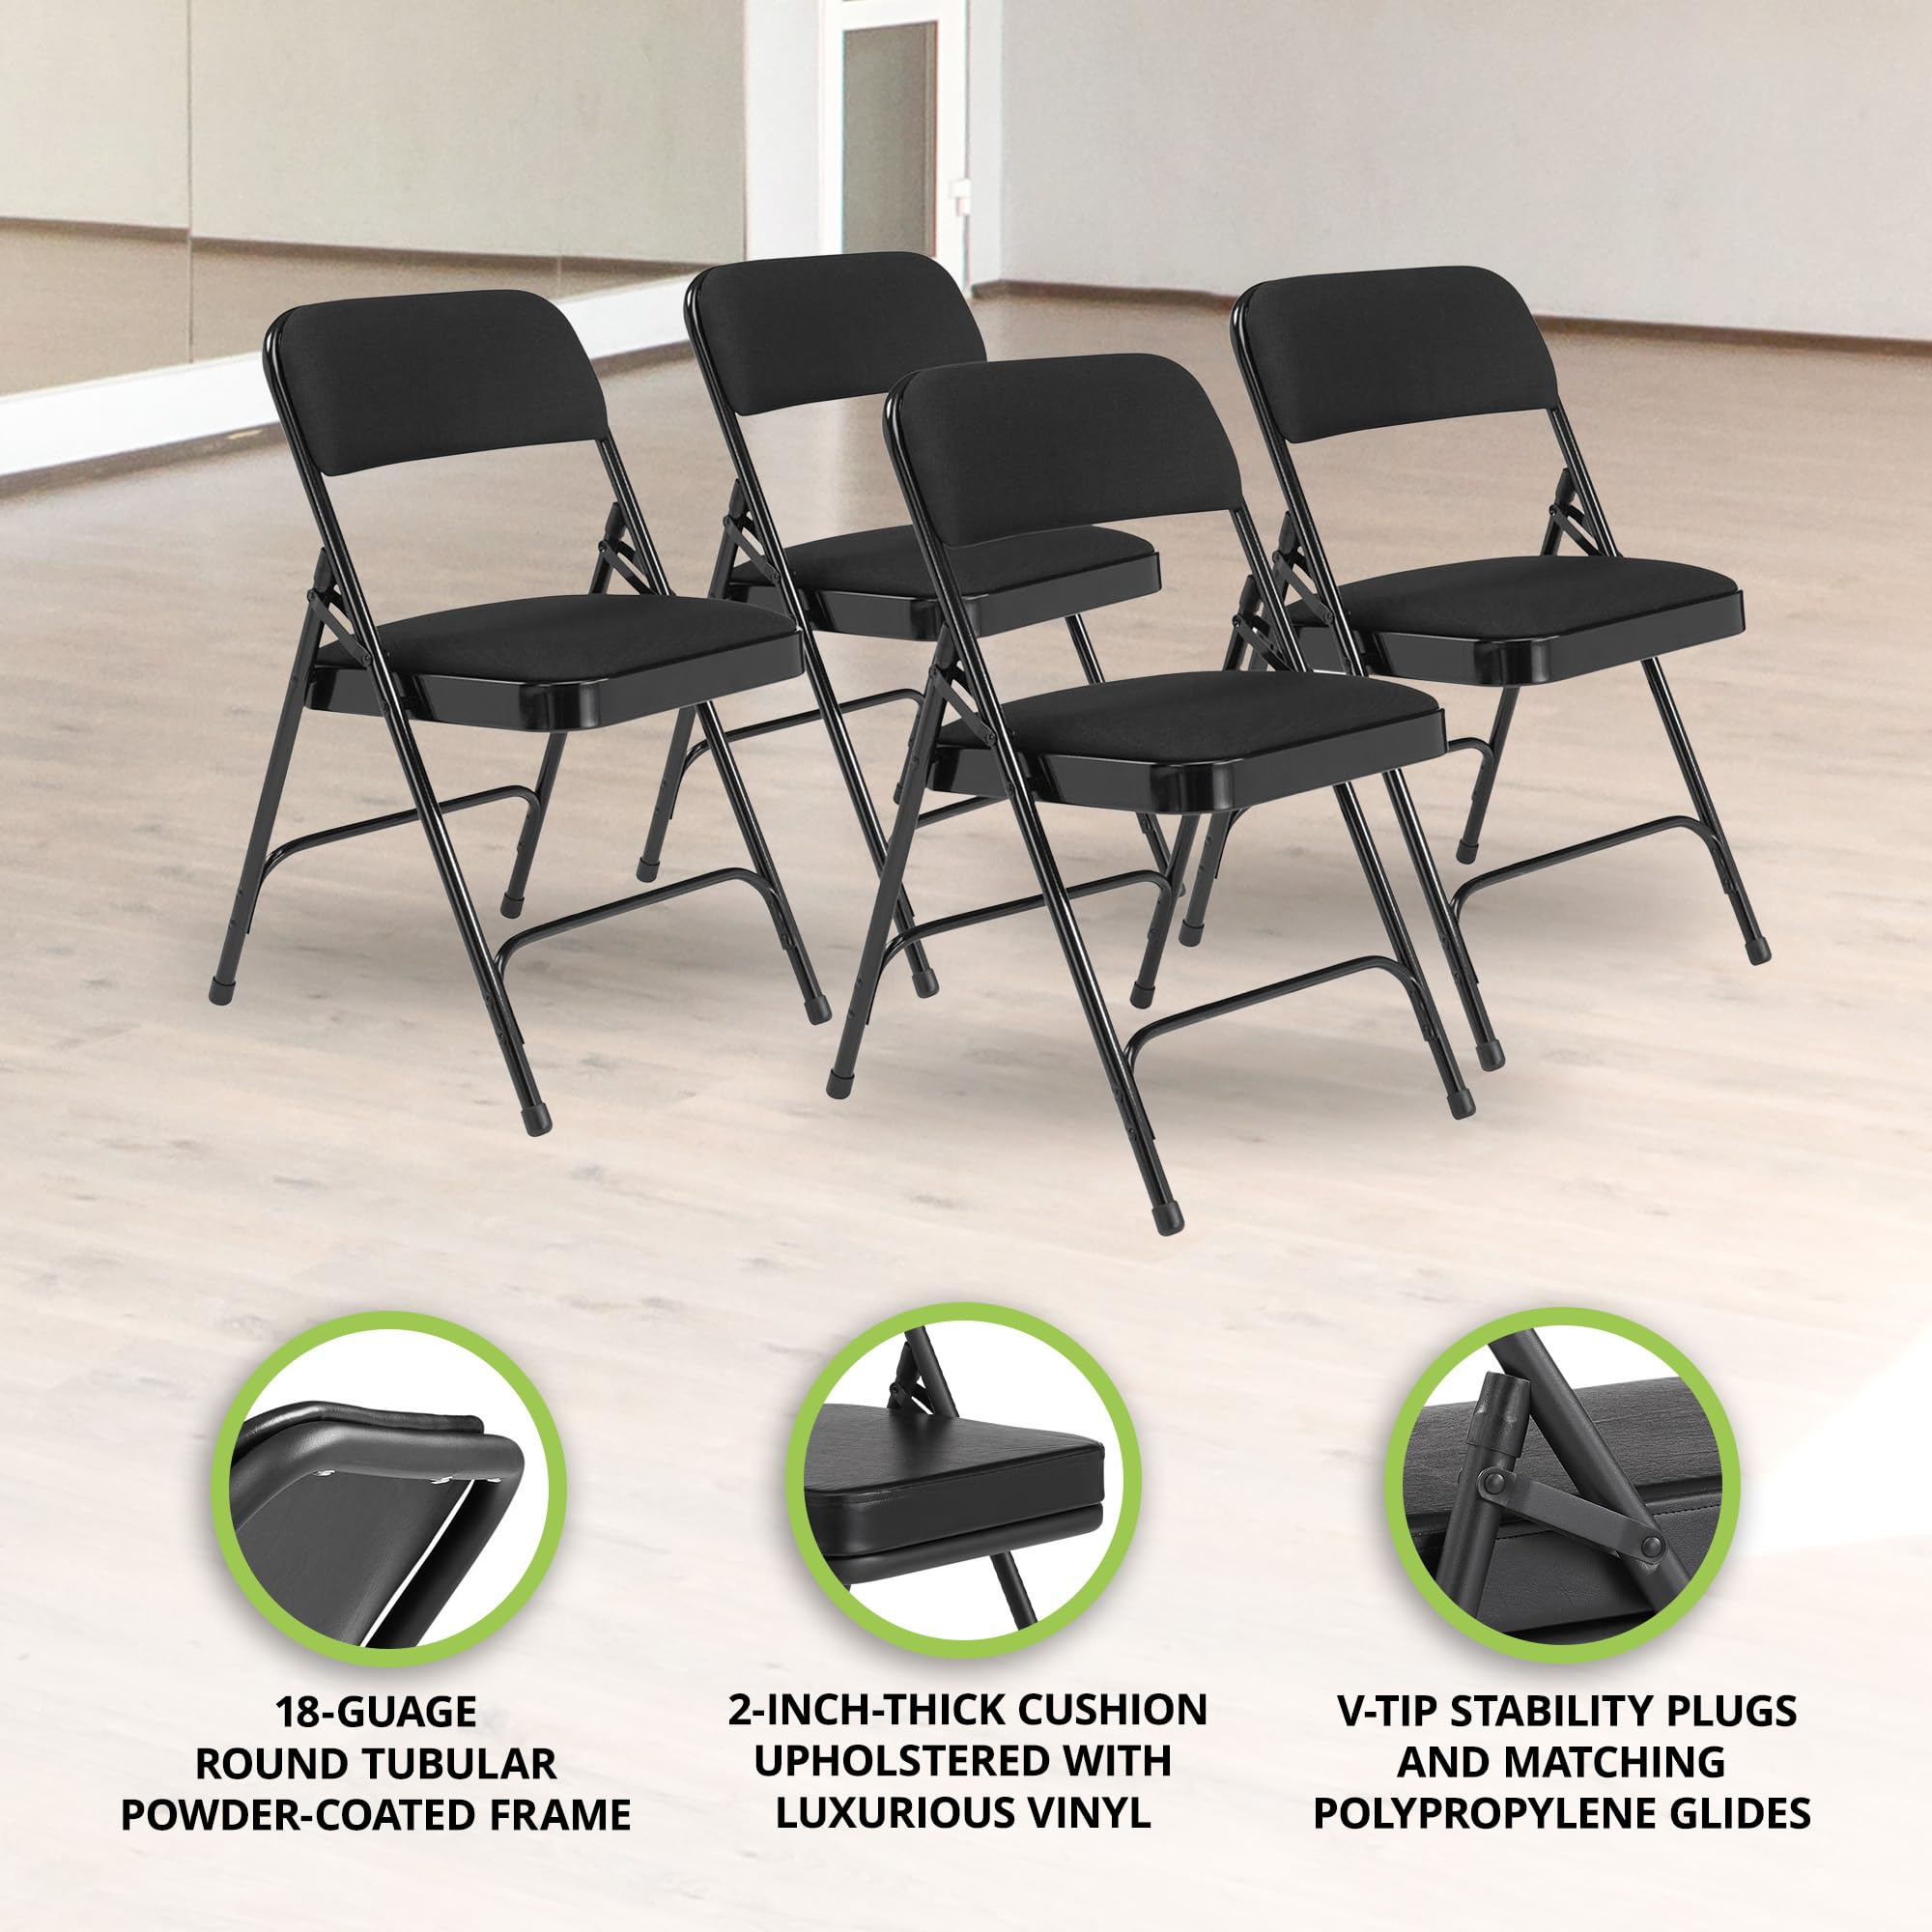 National Public Seating 2200 Series Deluxe Fabric Upholstered 2" Cushion Double Hinge Indoor Outdoor Dining/Office Folding Chair, Black, 4 Pack